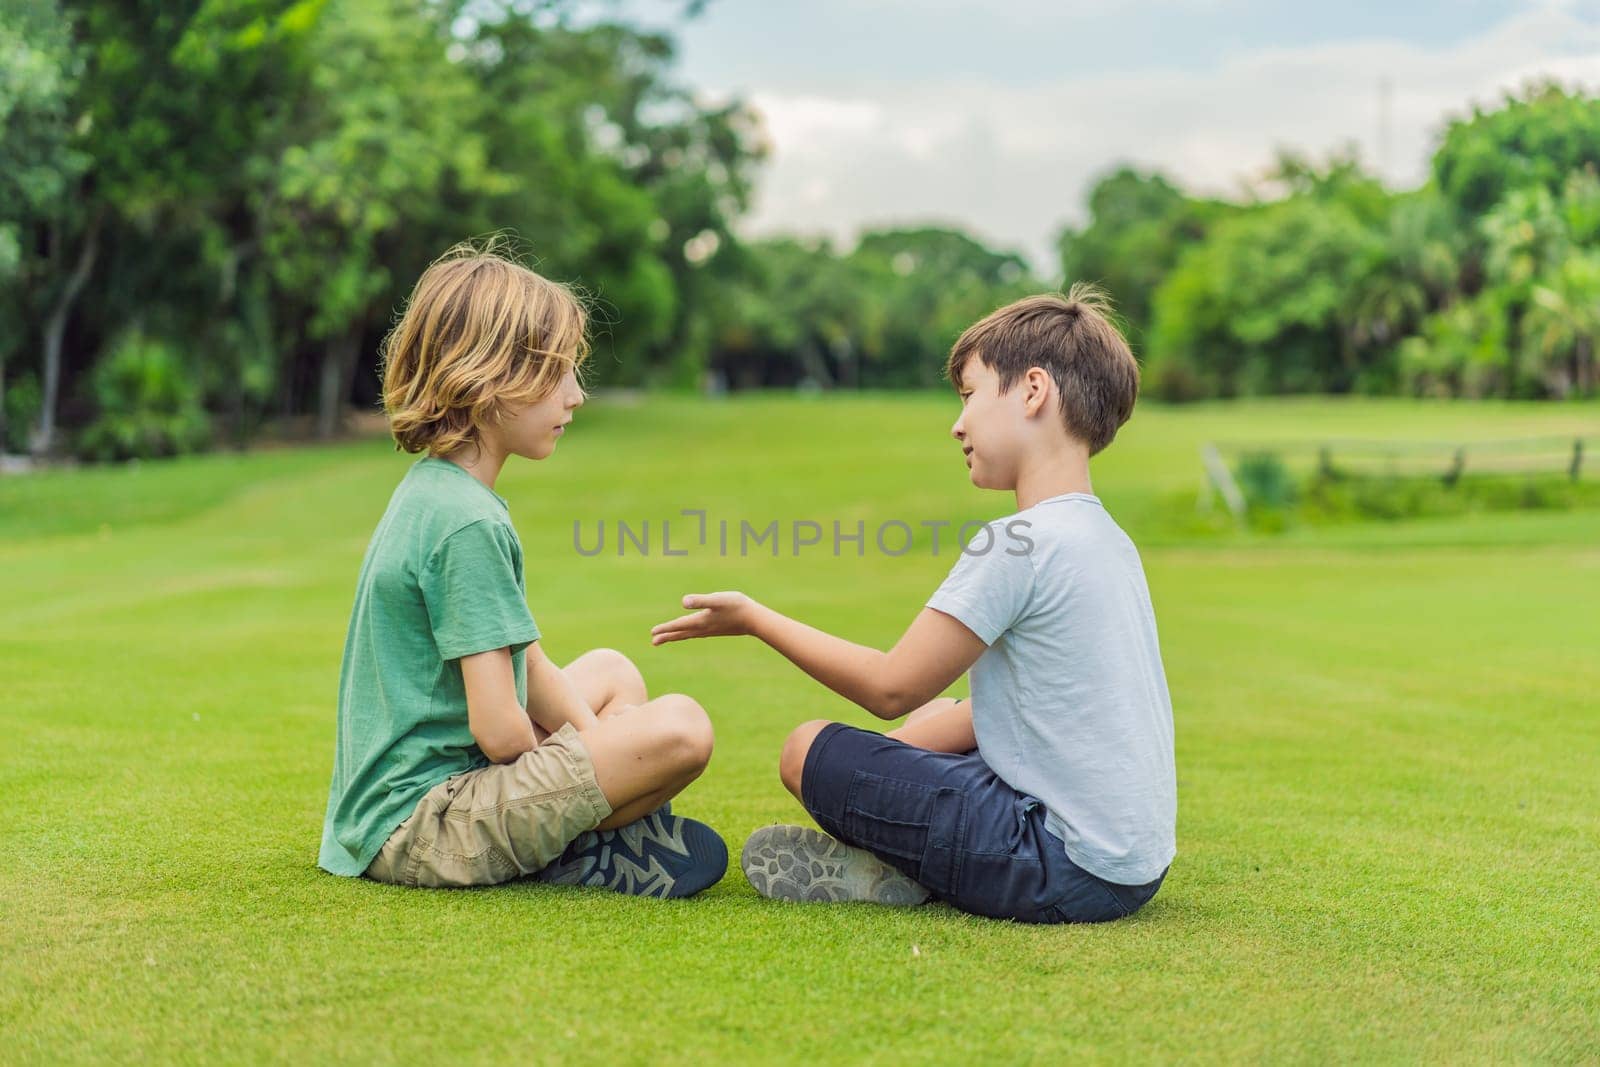 Two young boys share laughter and adventures in the sunlit park, cherishing the bonds of friendship and carefree moments.